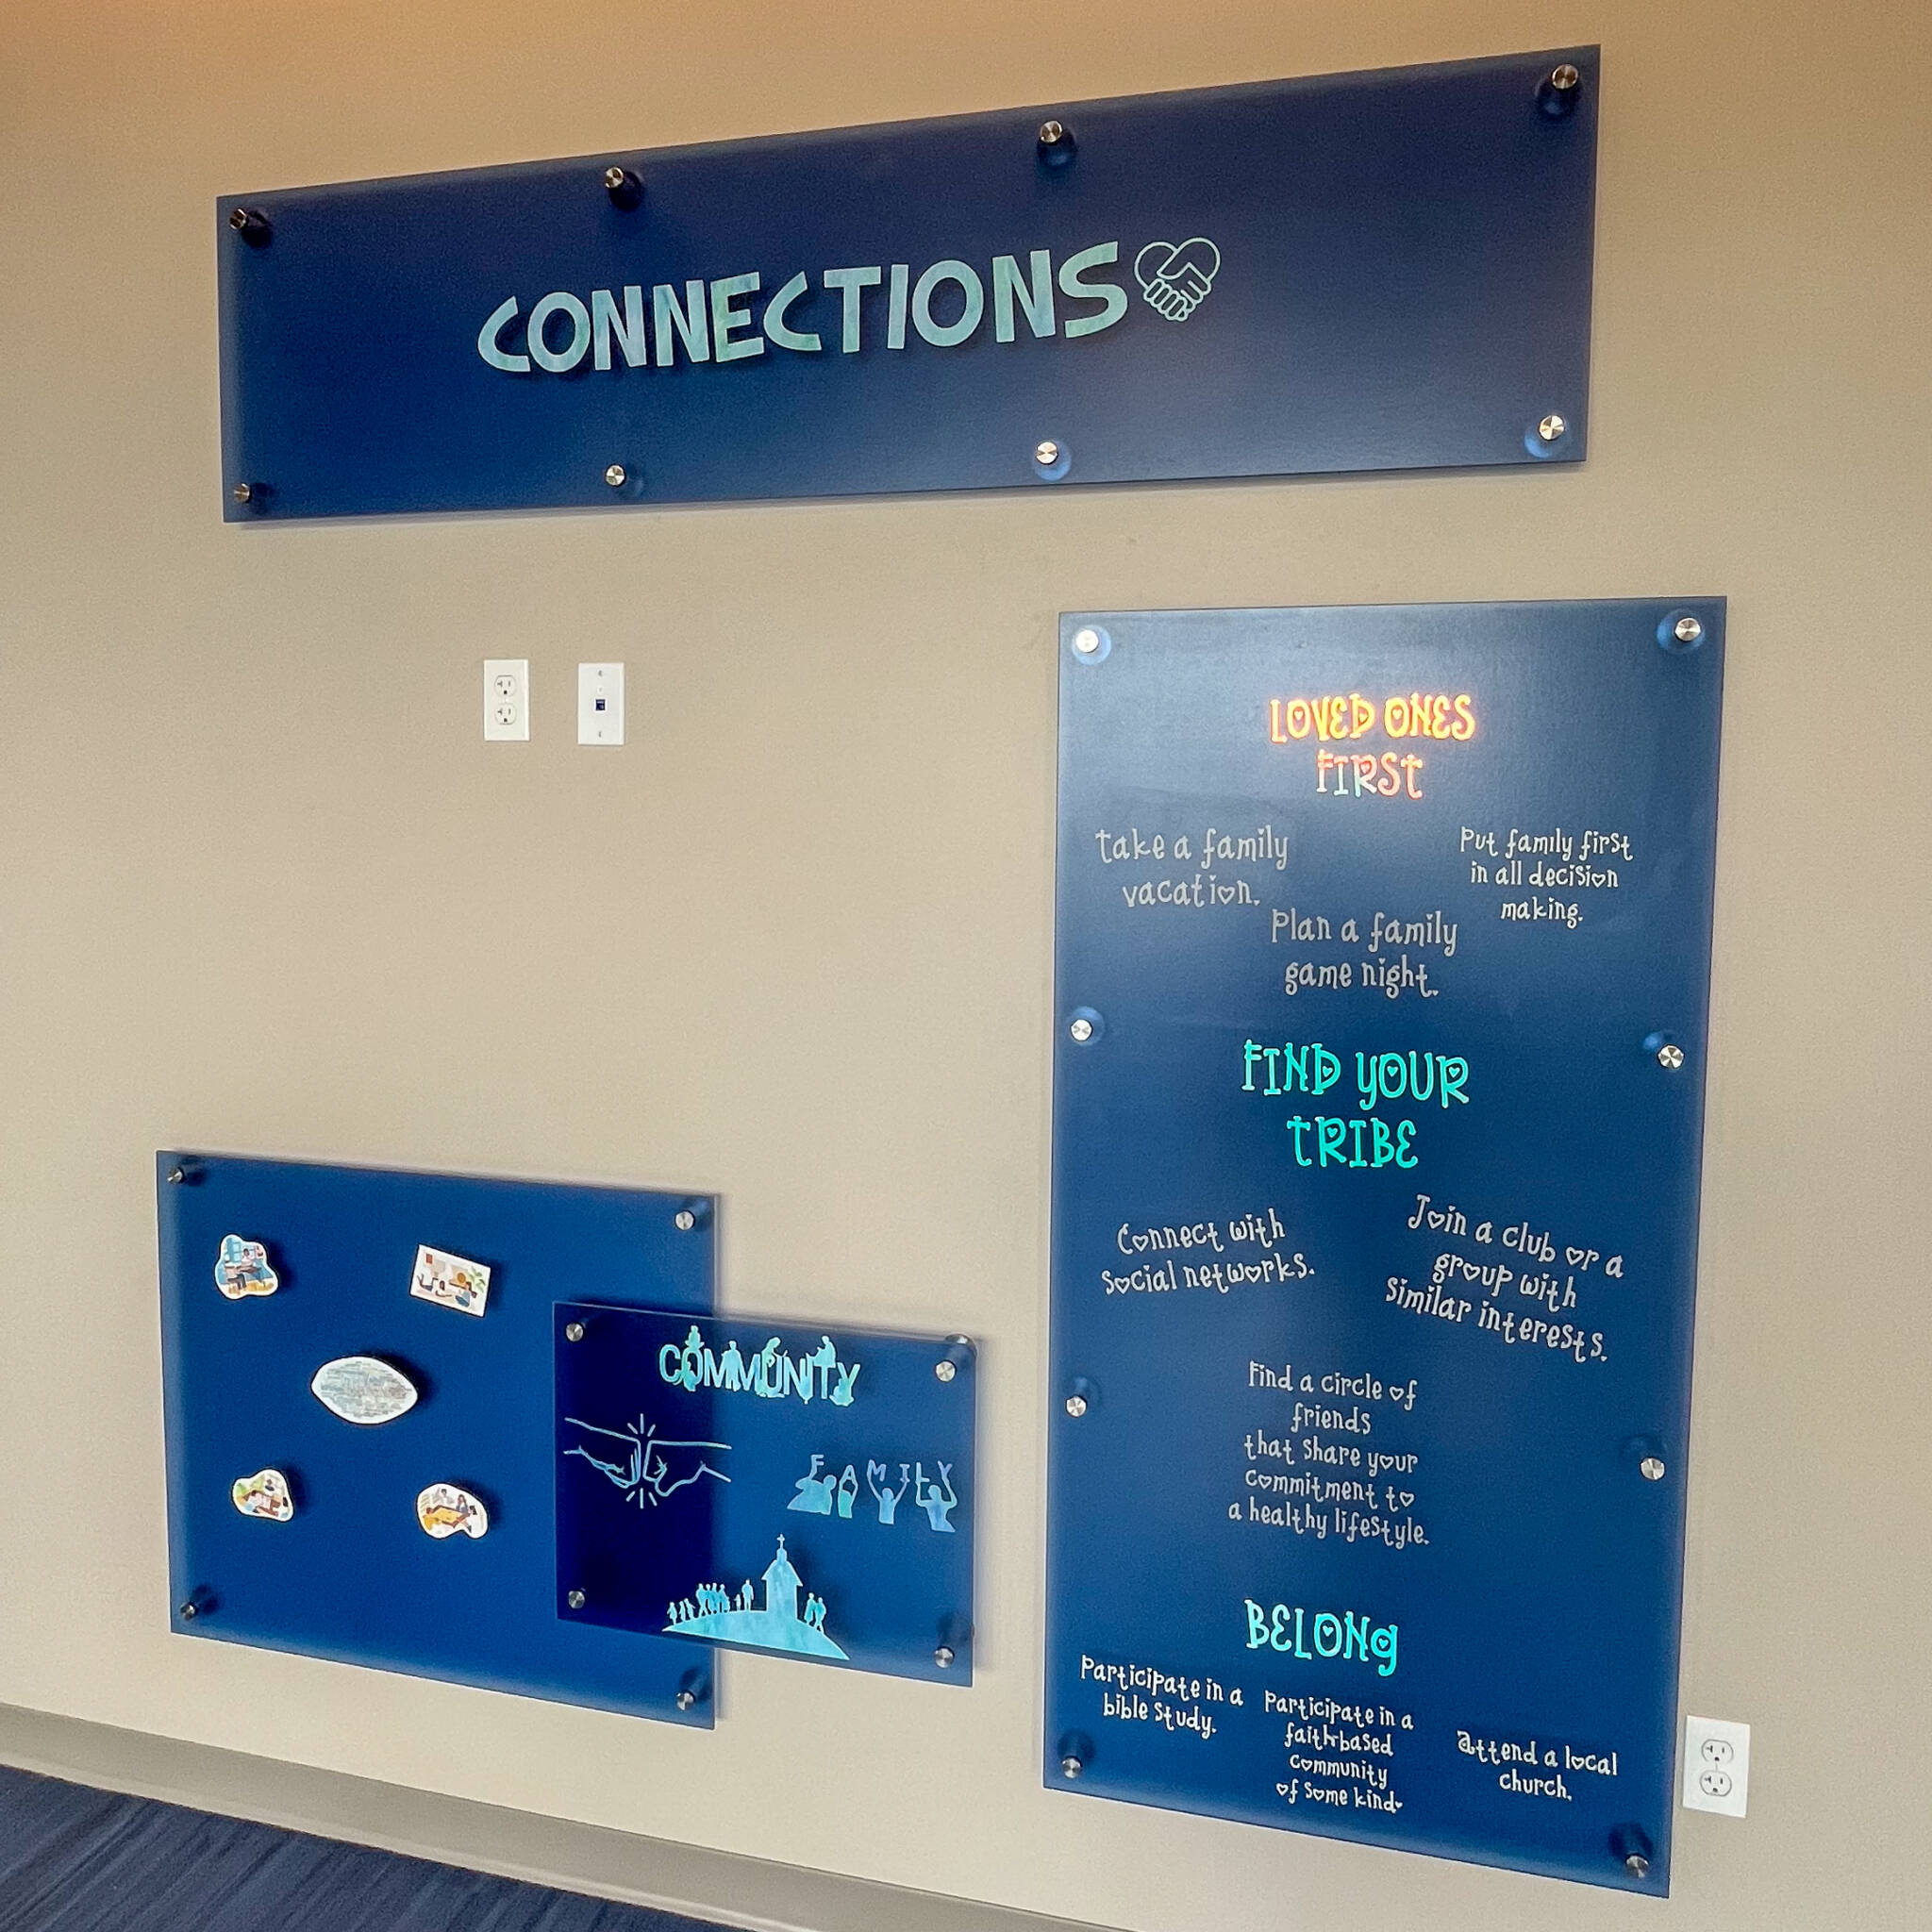 Signage explaining the importance of connections and community at the wellness center